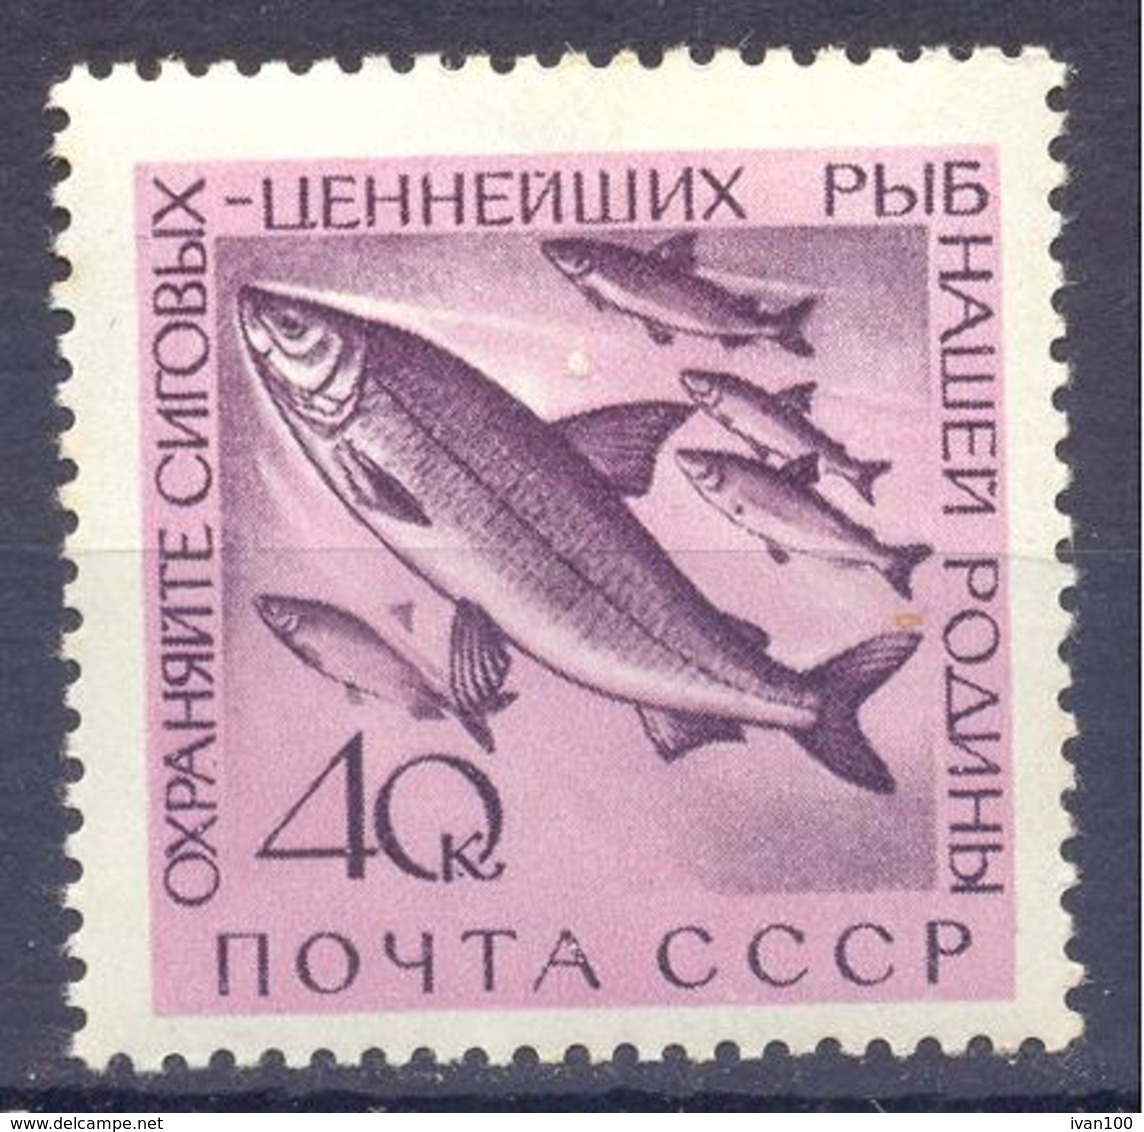 1960. USSR/Russia, Fisheries Protection, Mich.2385, 1v, Mint/** - Unused Stamps